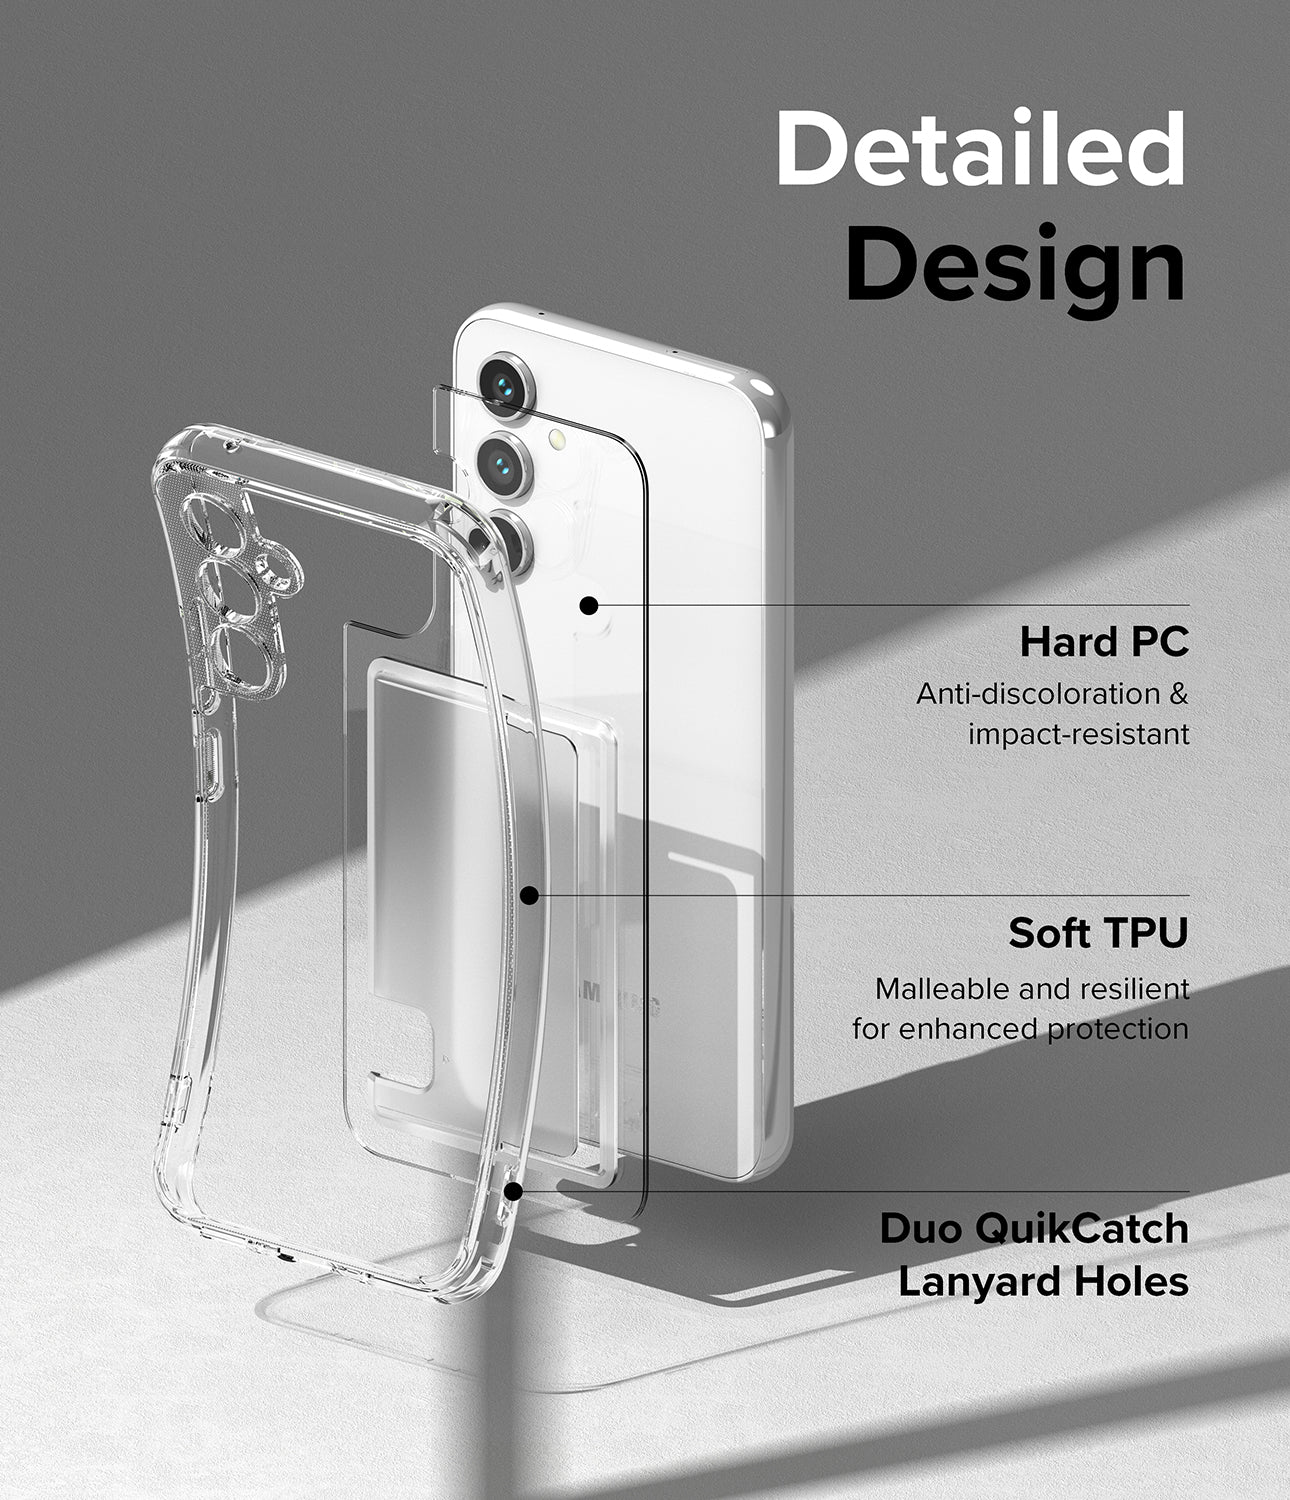 Detailed Design - Hard PC for back, Soft TPU for side, has Duo QuikCatch Lanyard holes